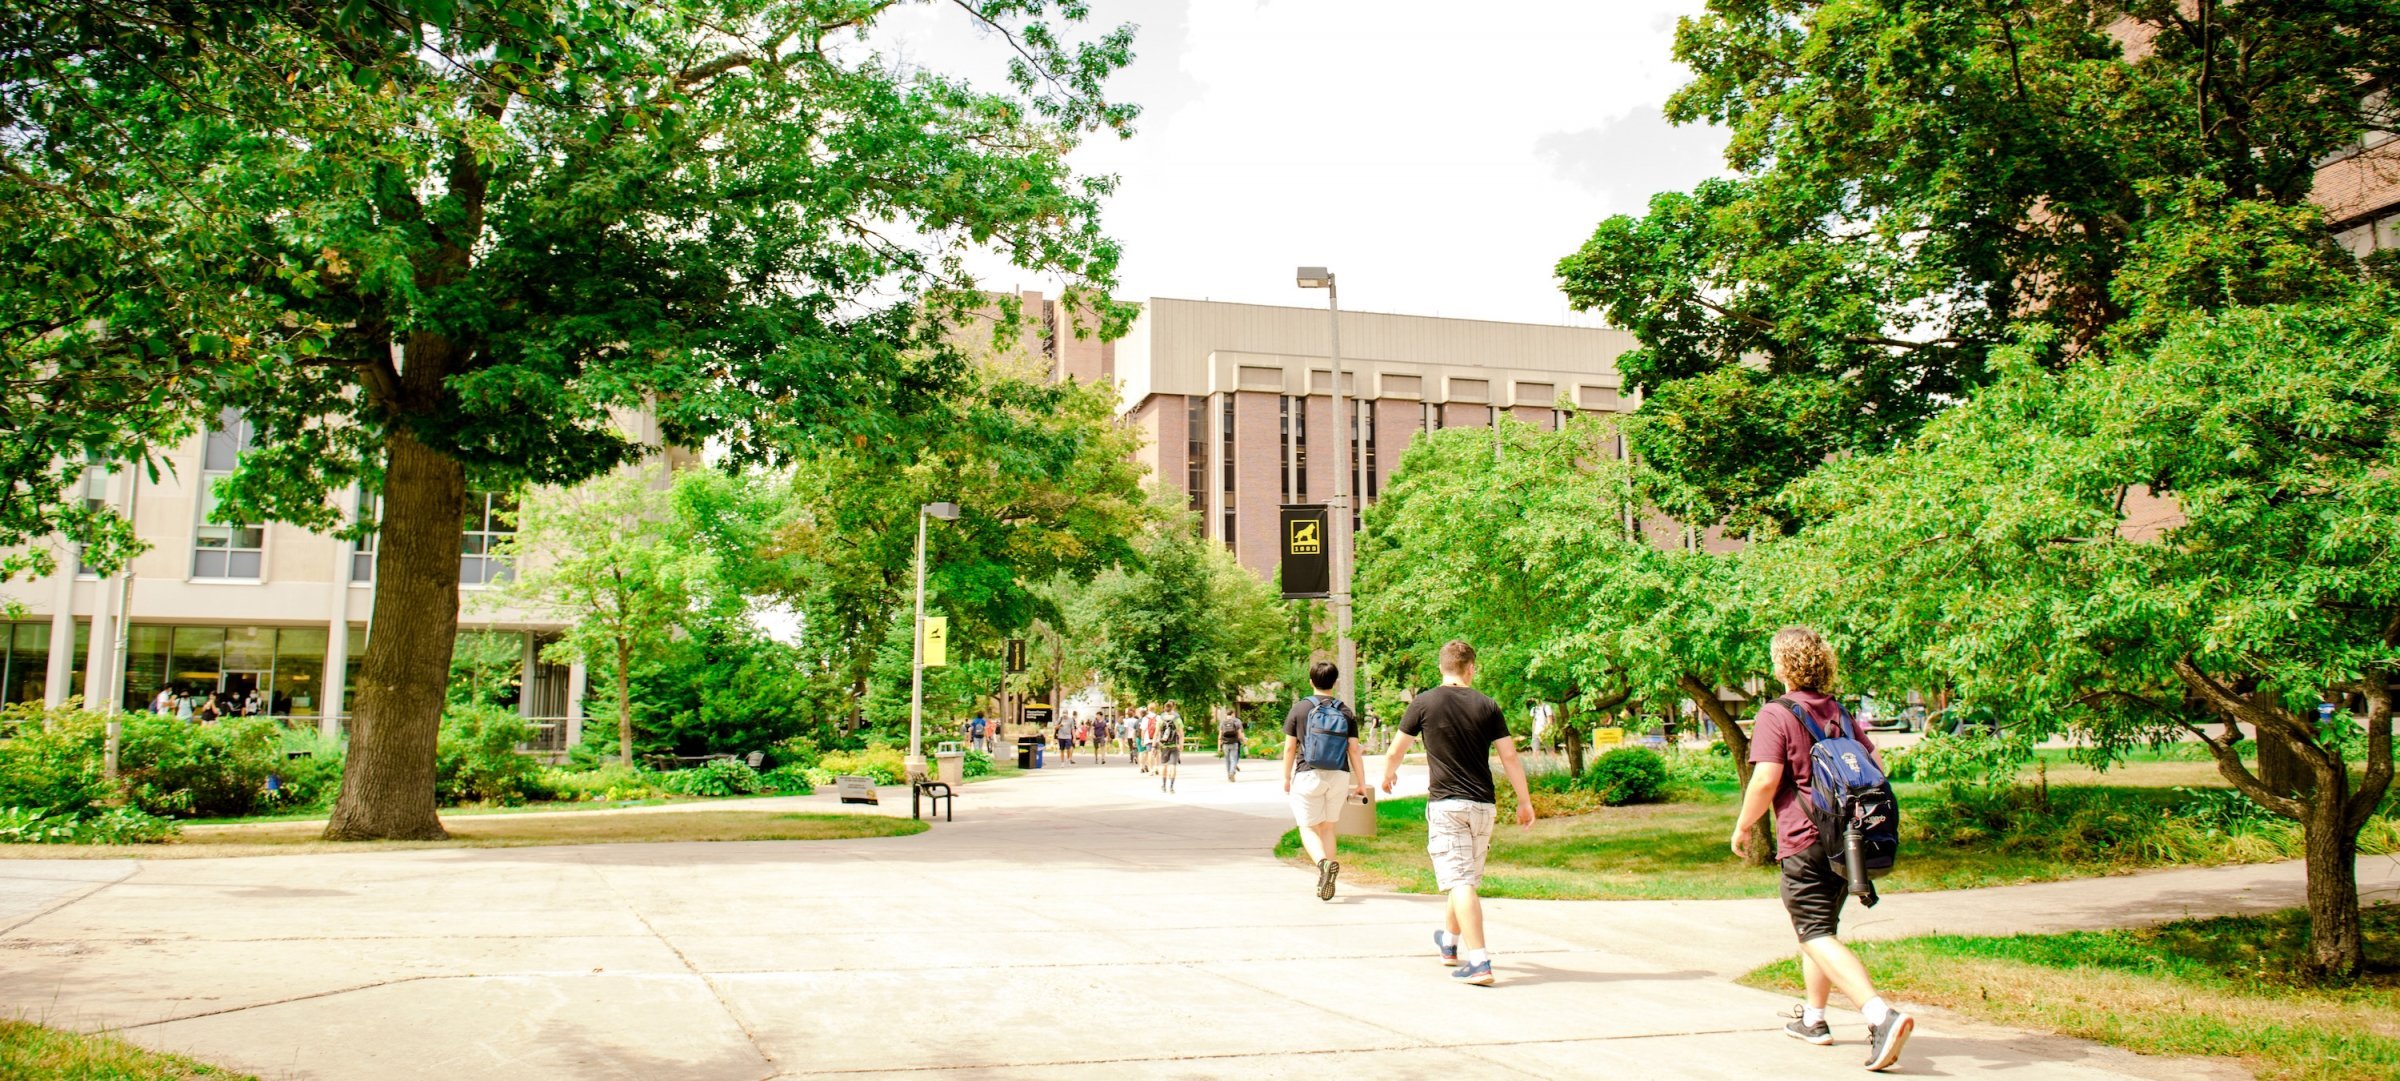 Campus mall in the summer showing students and the ChemSci Building.